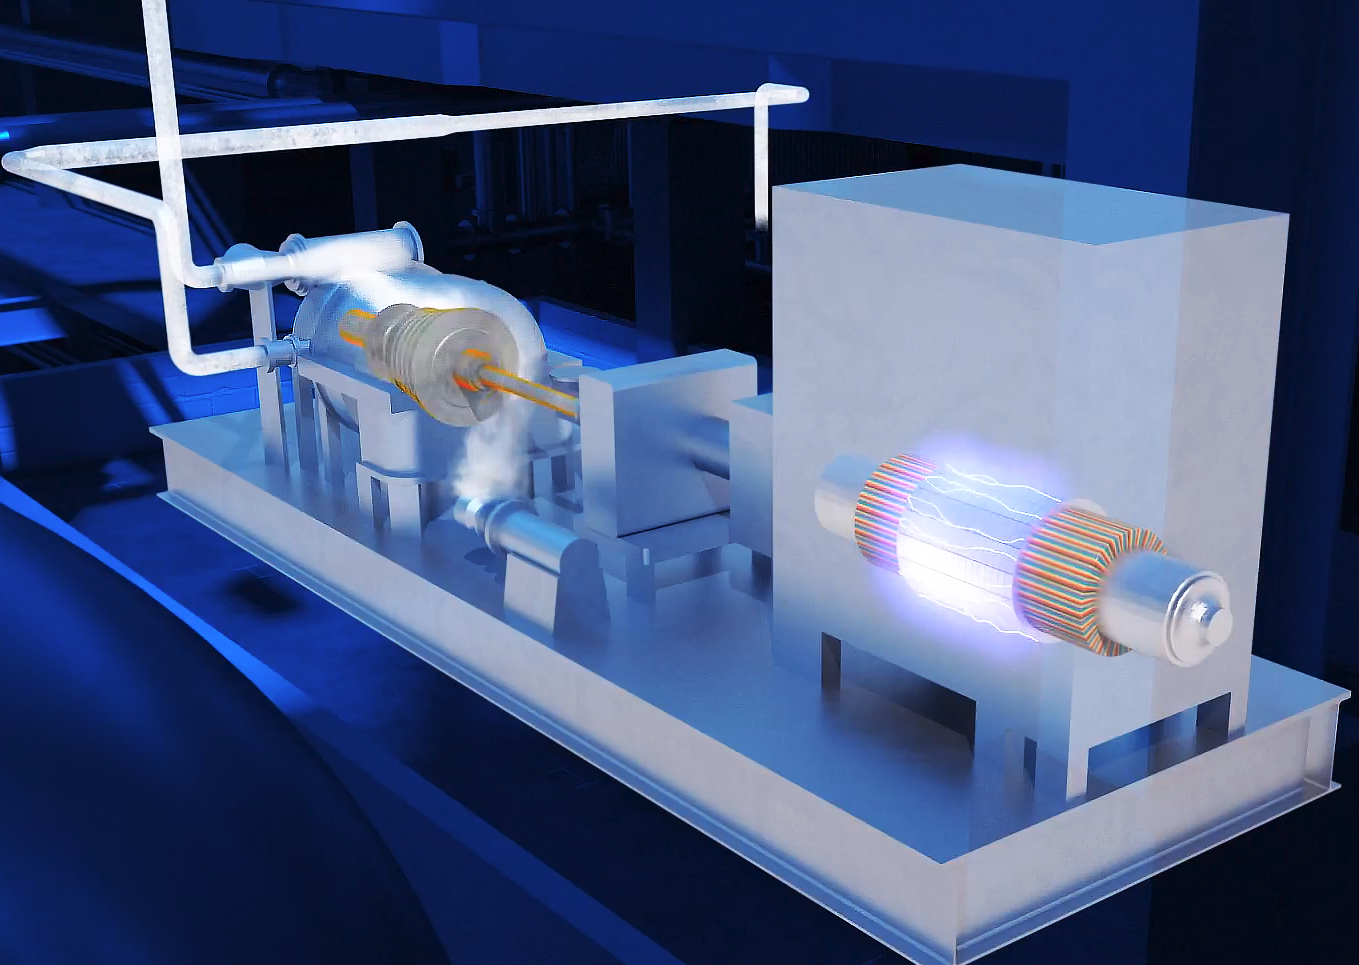 This image is a 3D rendered turbine that converts steam into electricity. Trinity animators made it transparent so viewers could observe the process that occurs inside of it.The background is displays structures of the machinery where it is located in a dark blue color. The turbine is displayed in a light blue color and hints of orange inside of the turbine represent certain elements inside of the machine.